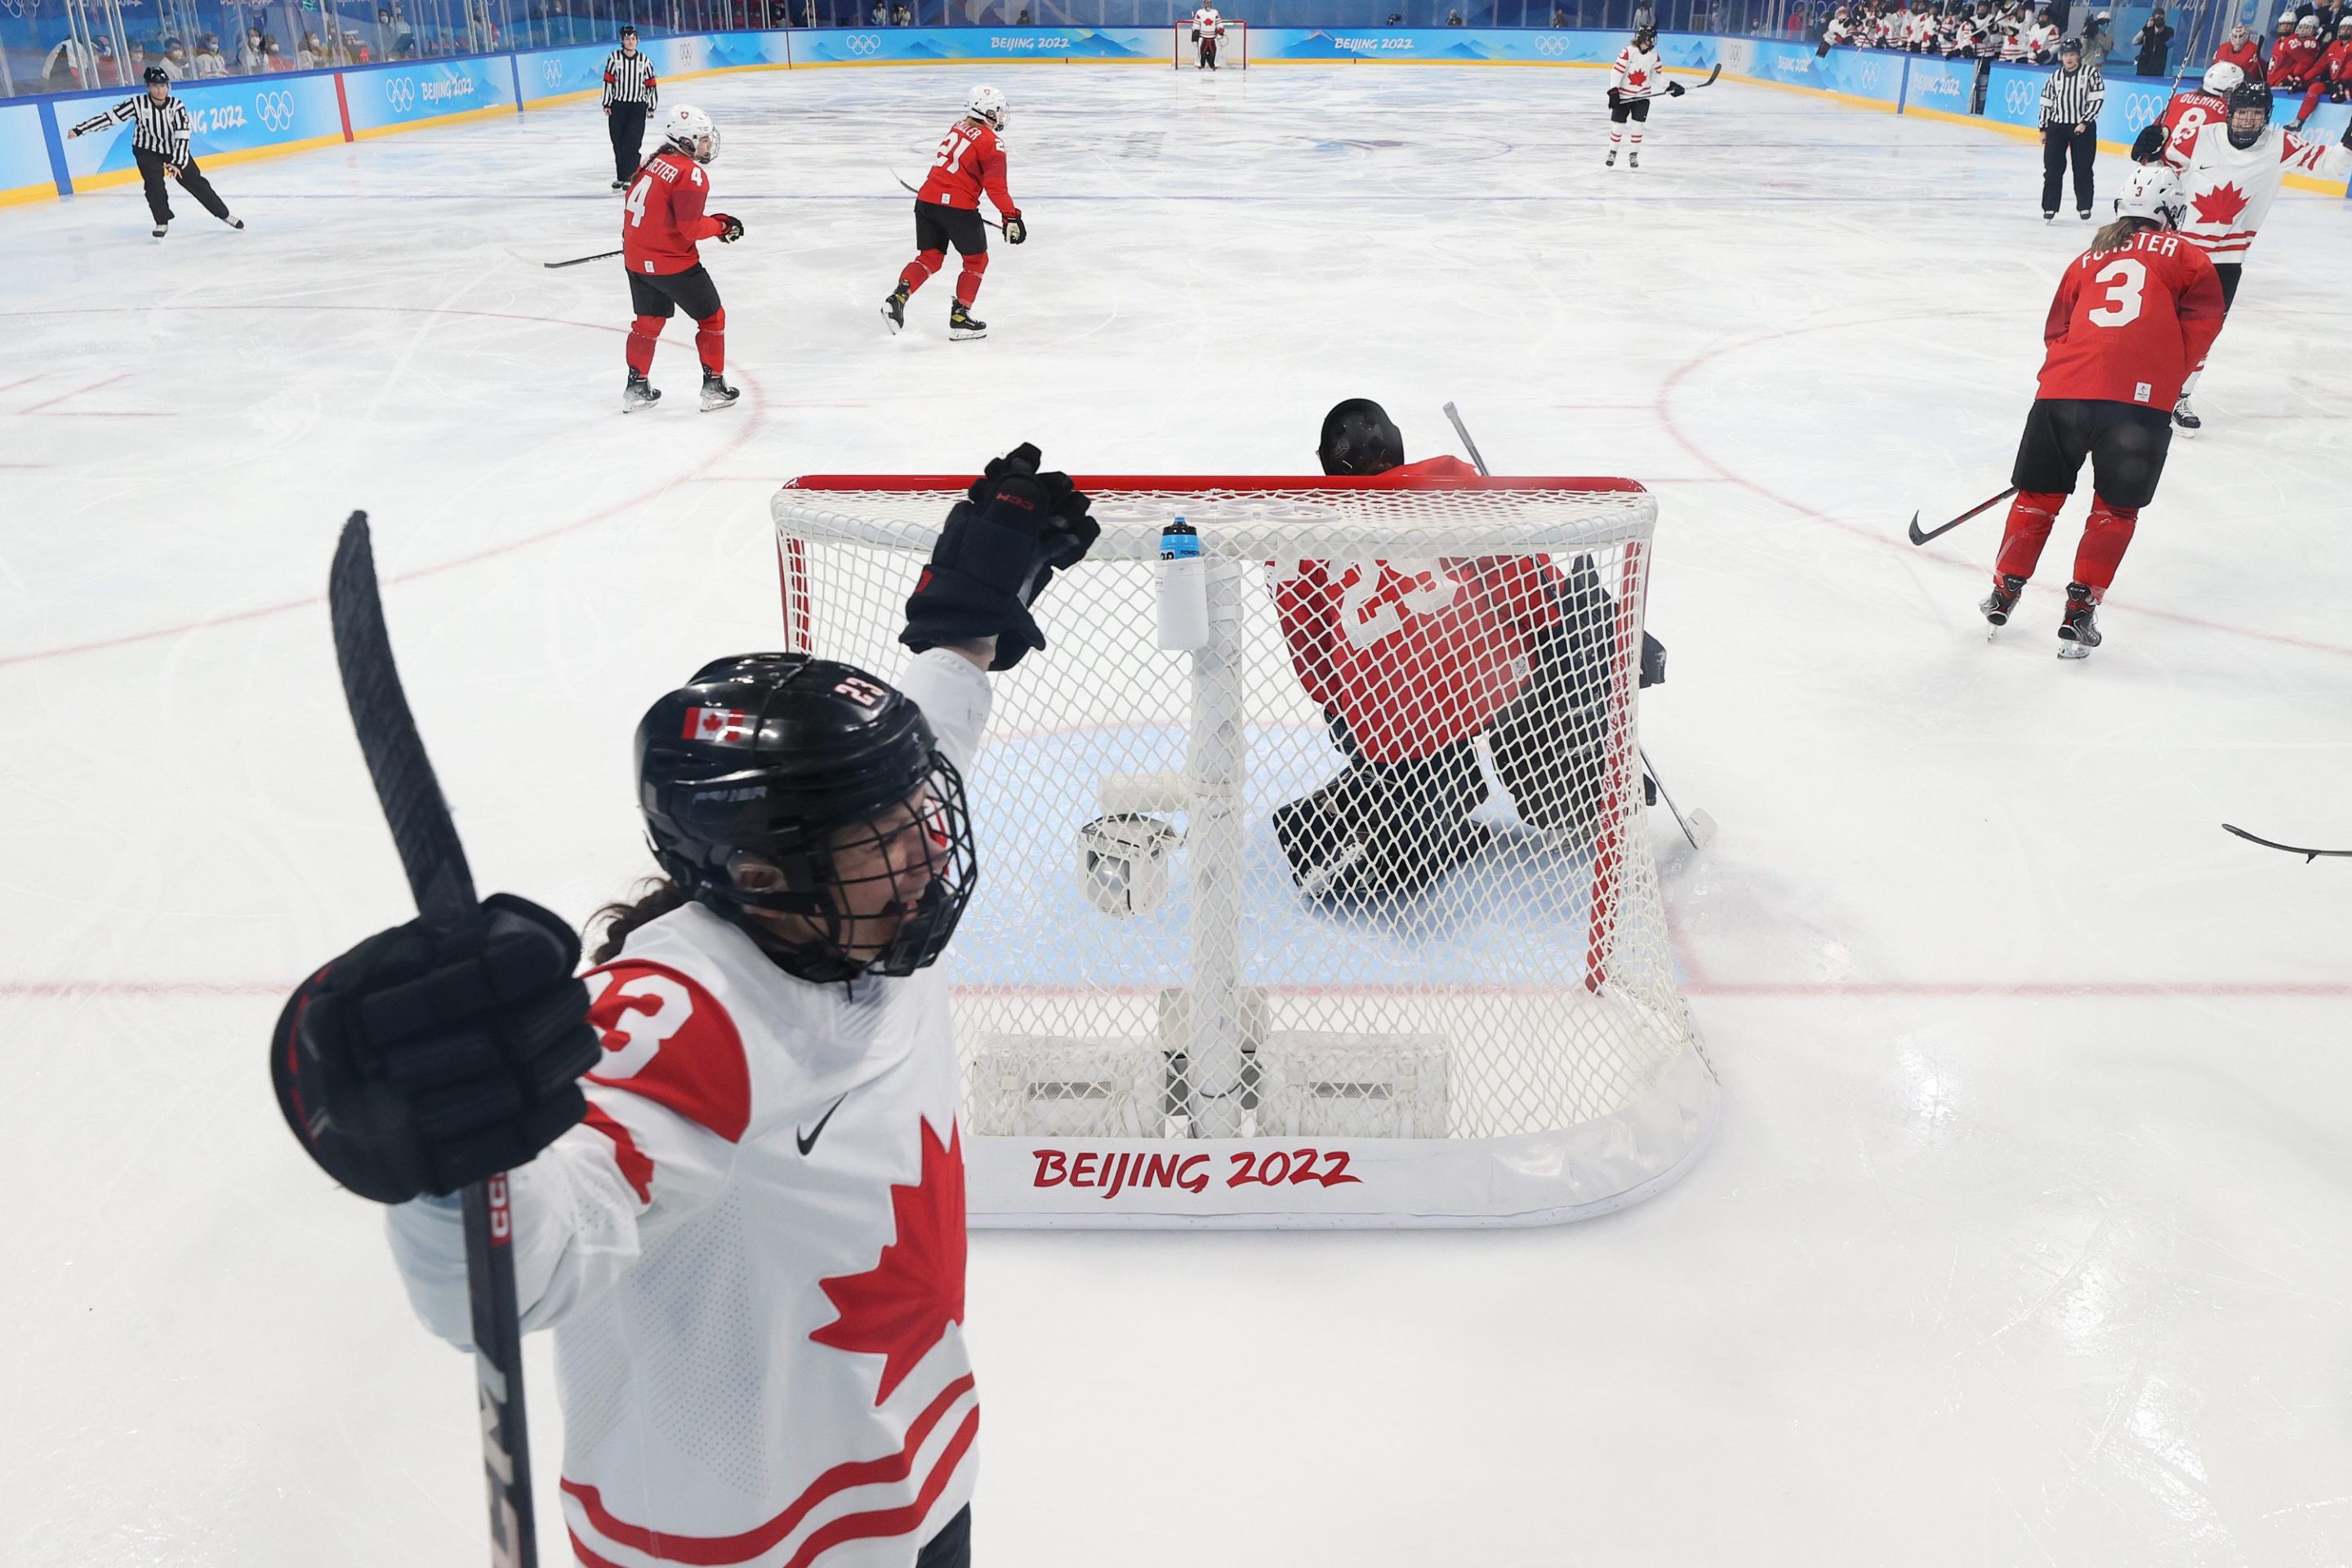 Erin Ambrose #23 of Team Canada reacts after a goal by teammate Emma Maltais #27 (not in photo) during the third period of the Women's Ice Hockey Playoff Semifinal match between Team Canada and Team Switzerland on Day 10 of the Beijing 2022 Winter Olympic Games at Wukesong Sports Centre on February 14, 2022 in Beijing, China.